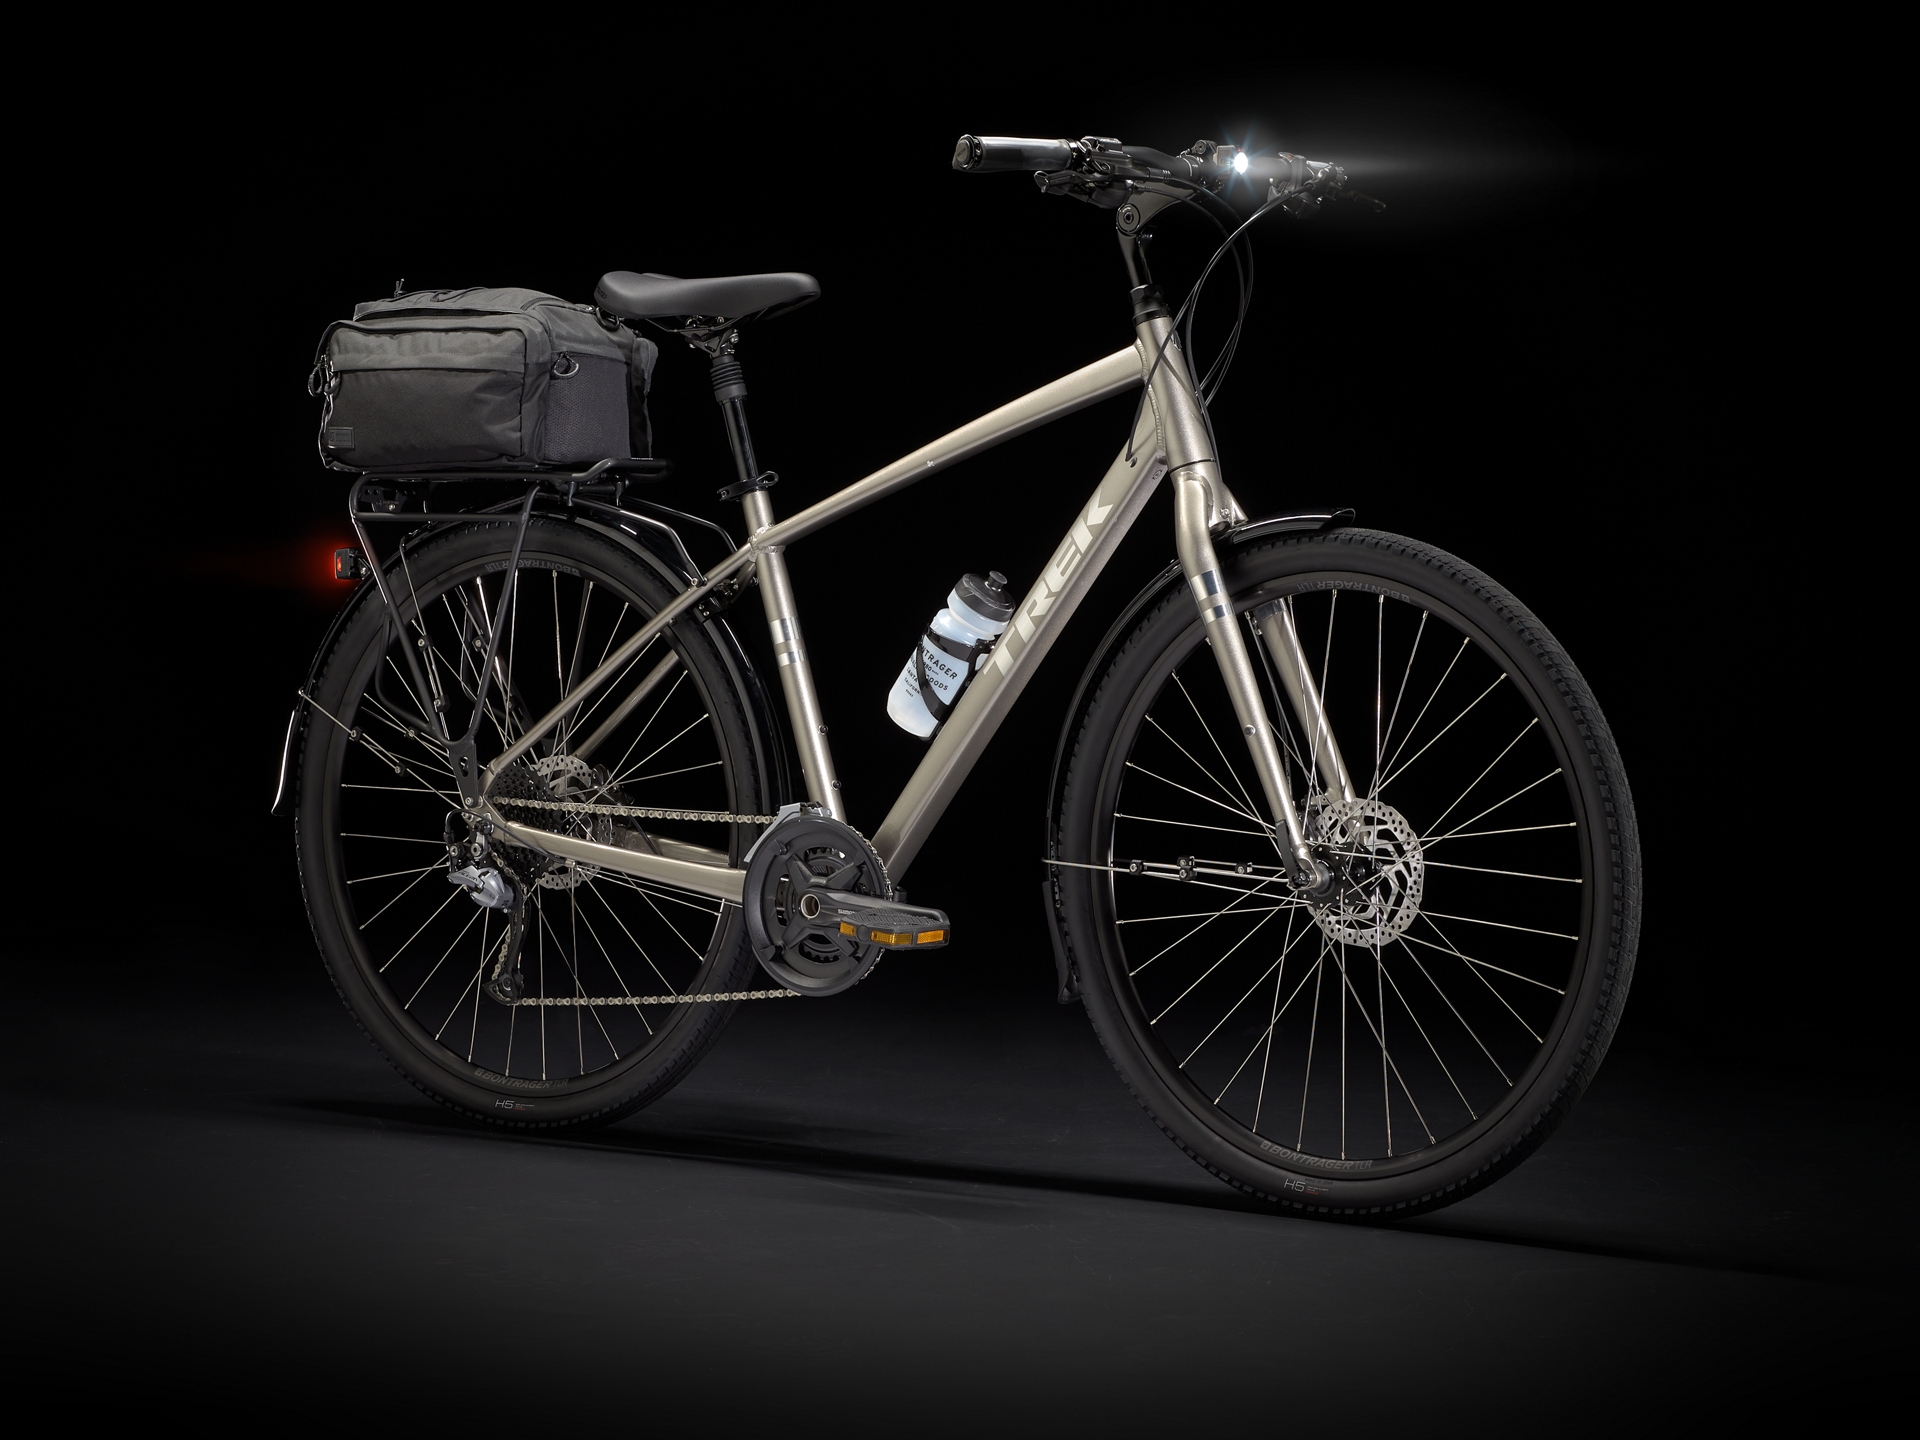 Trek Verve fully equipped bicycle